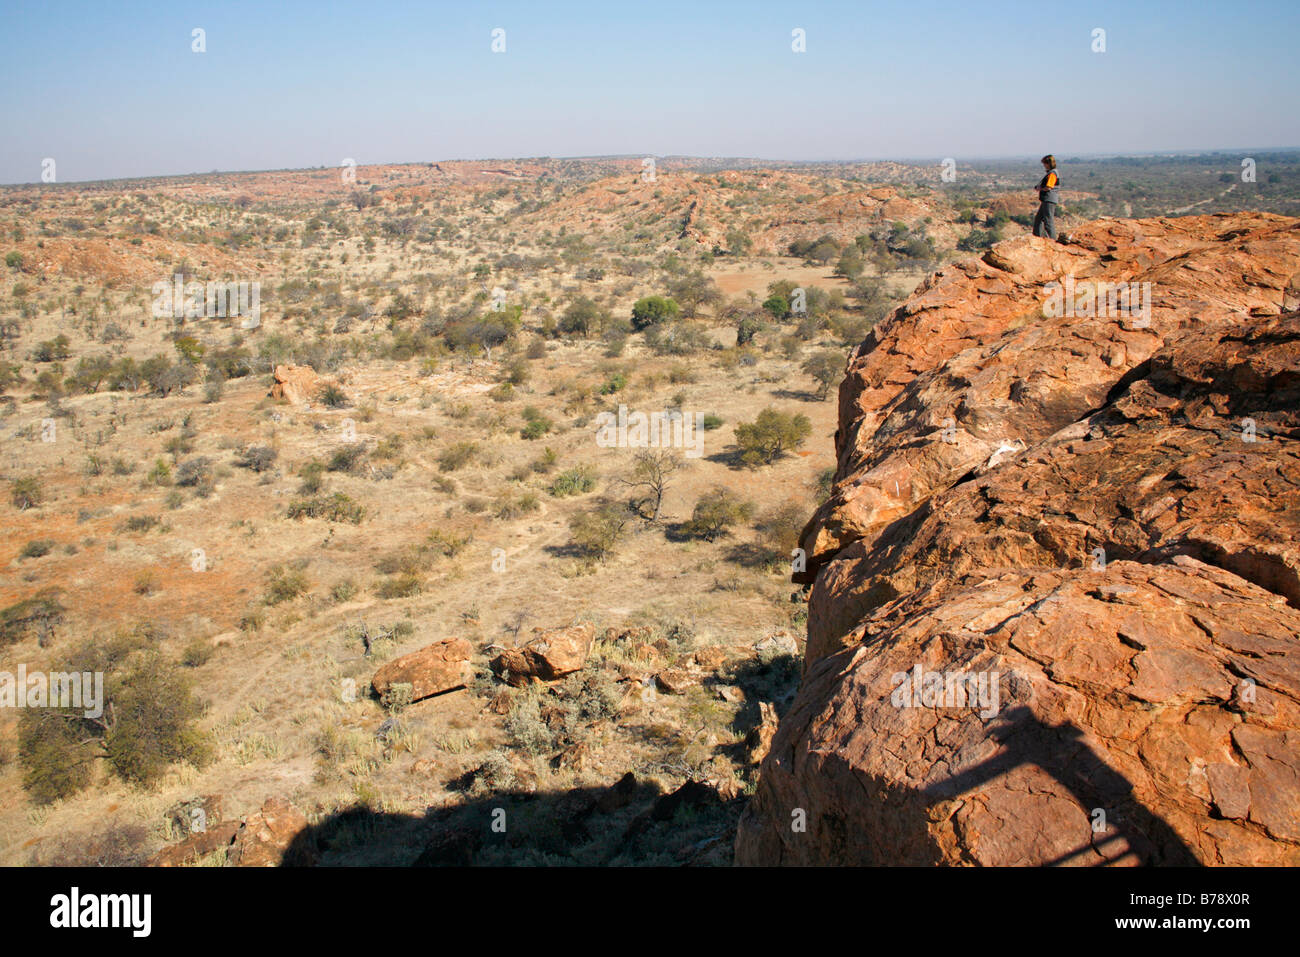 A tourist standing on a cliff overlooking the arid Limpopo River valley landscape Stock Photo